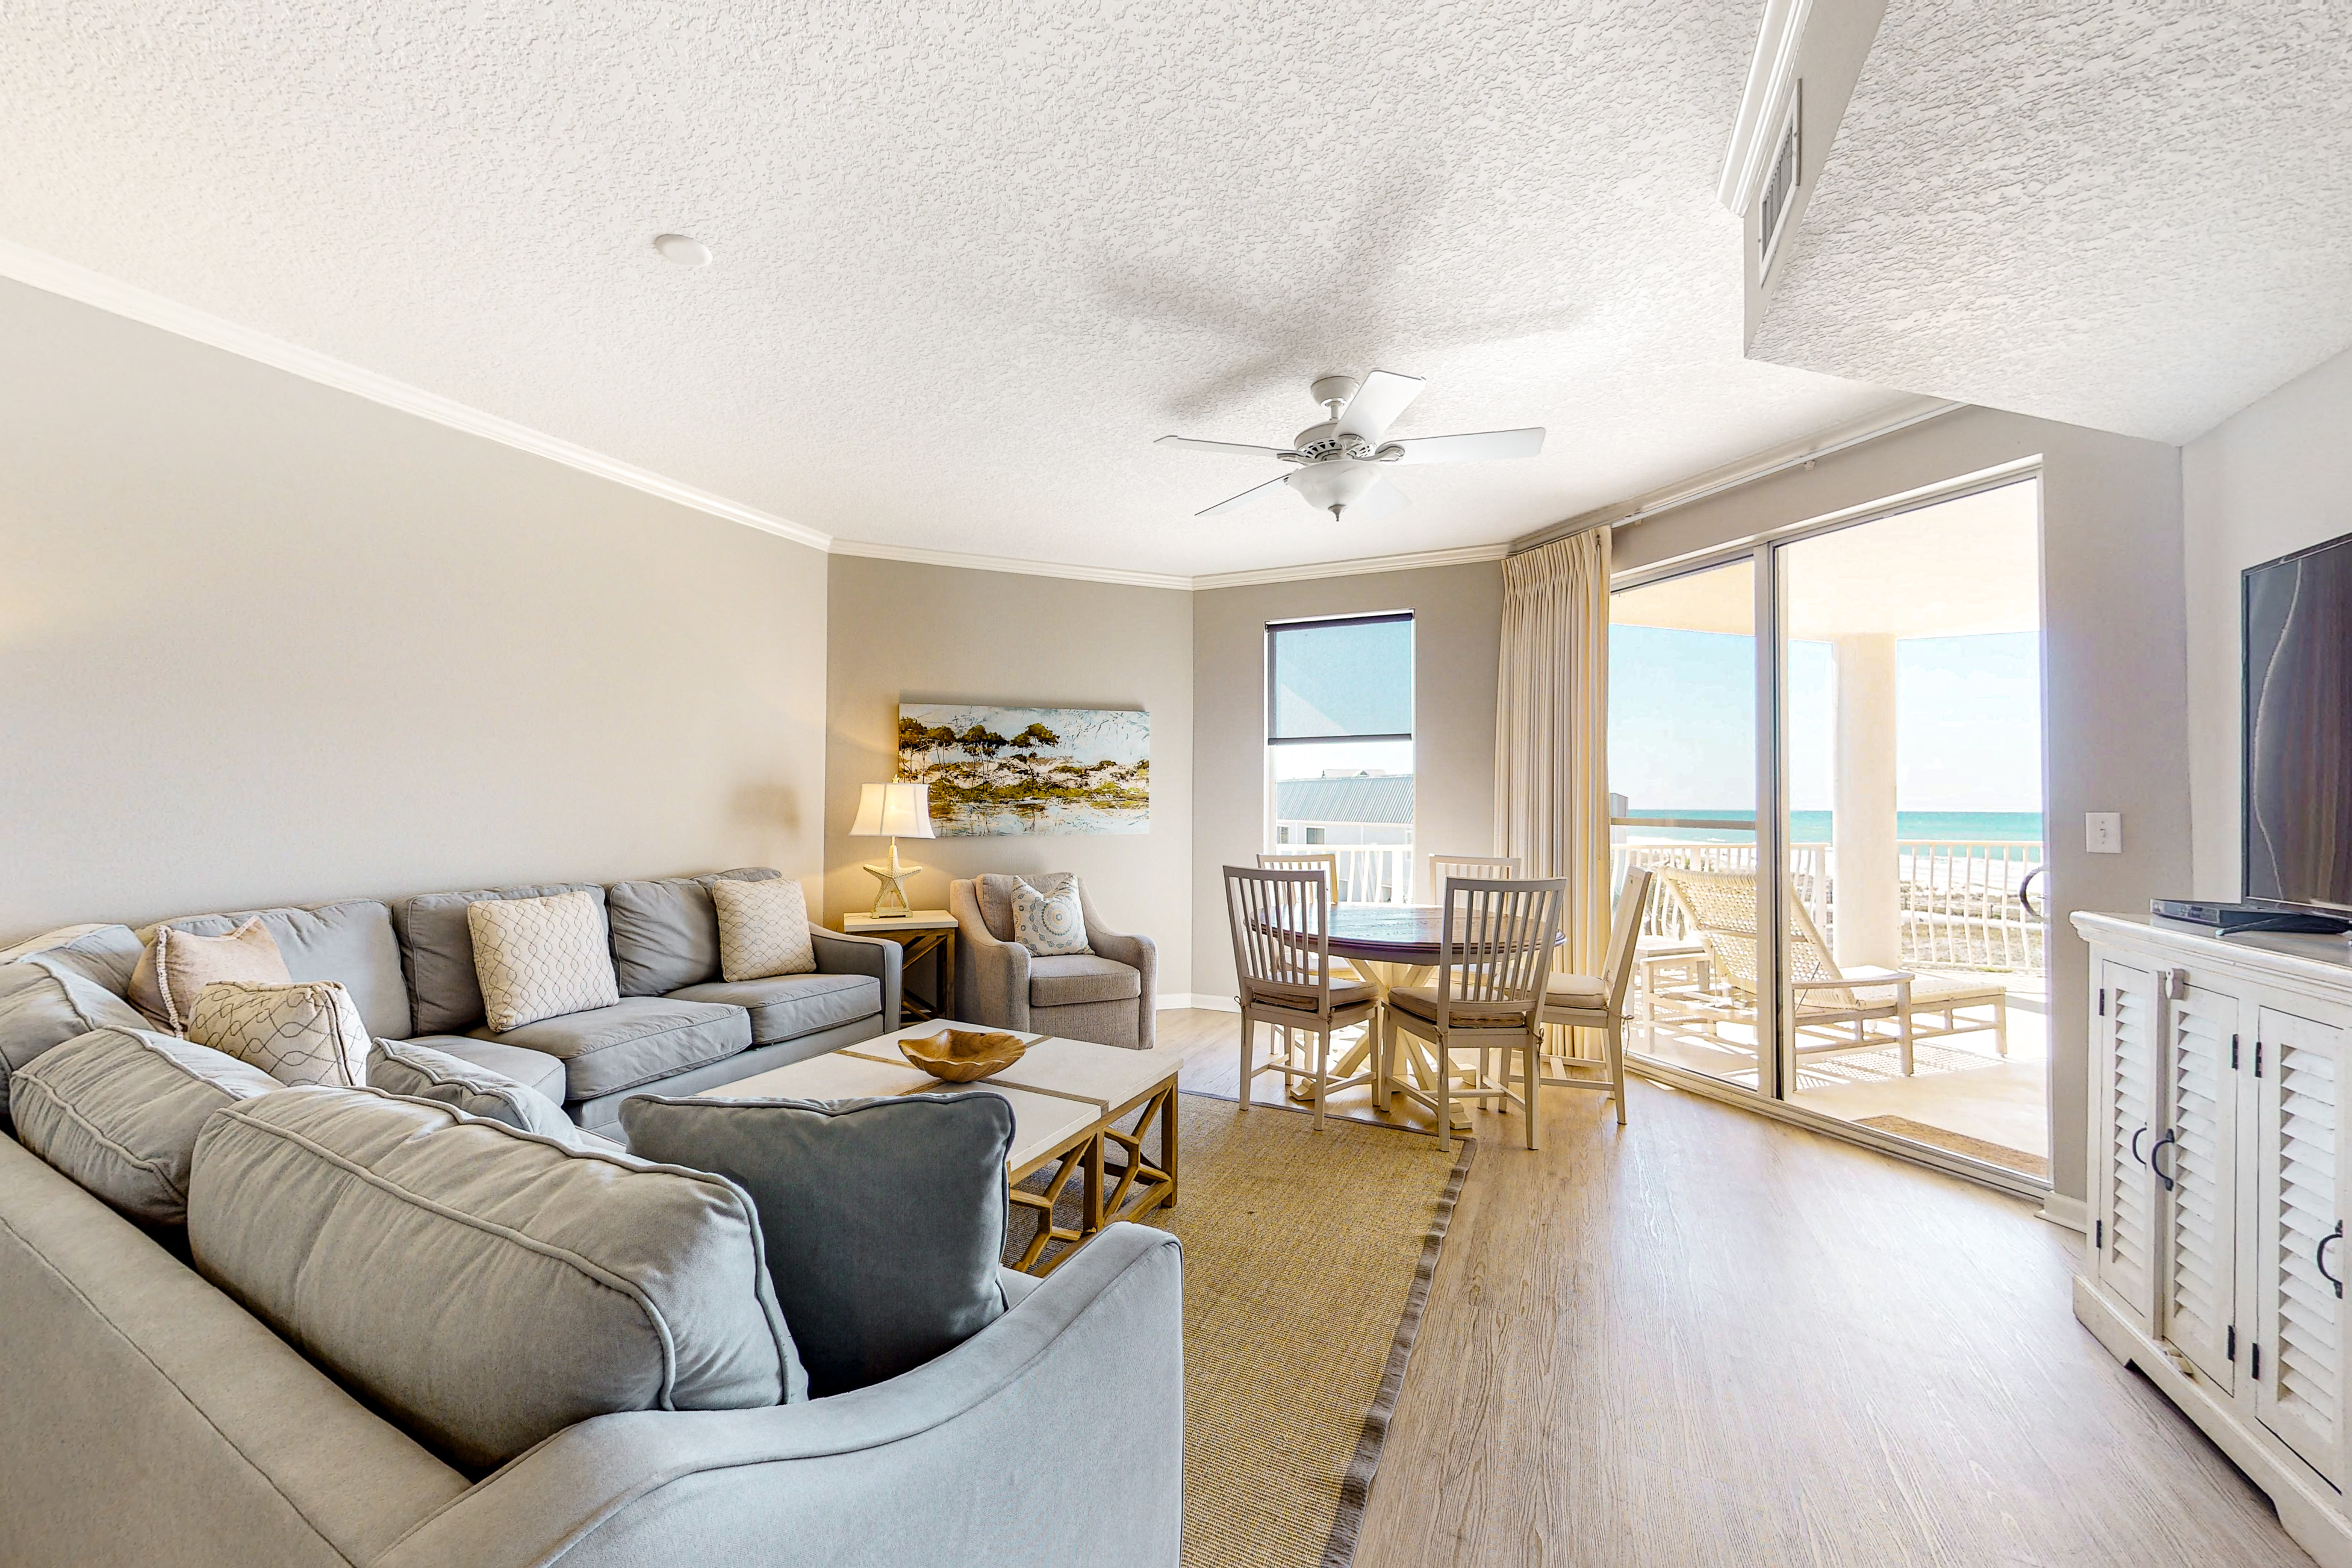 Dunes of Seagrove A301 Condo rental in Dunes of Seagrove in Highway 30-A Florida - #1